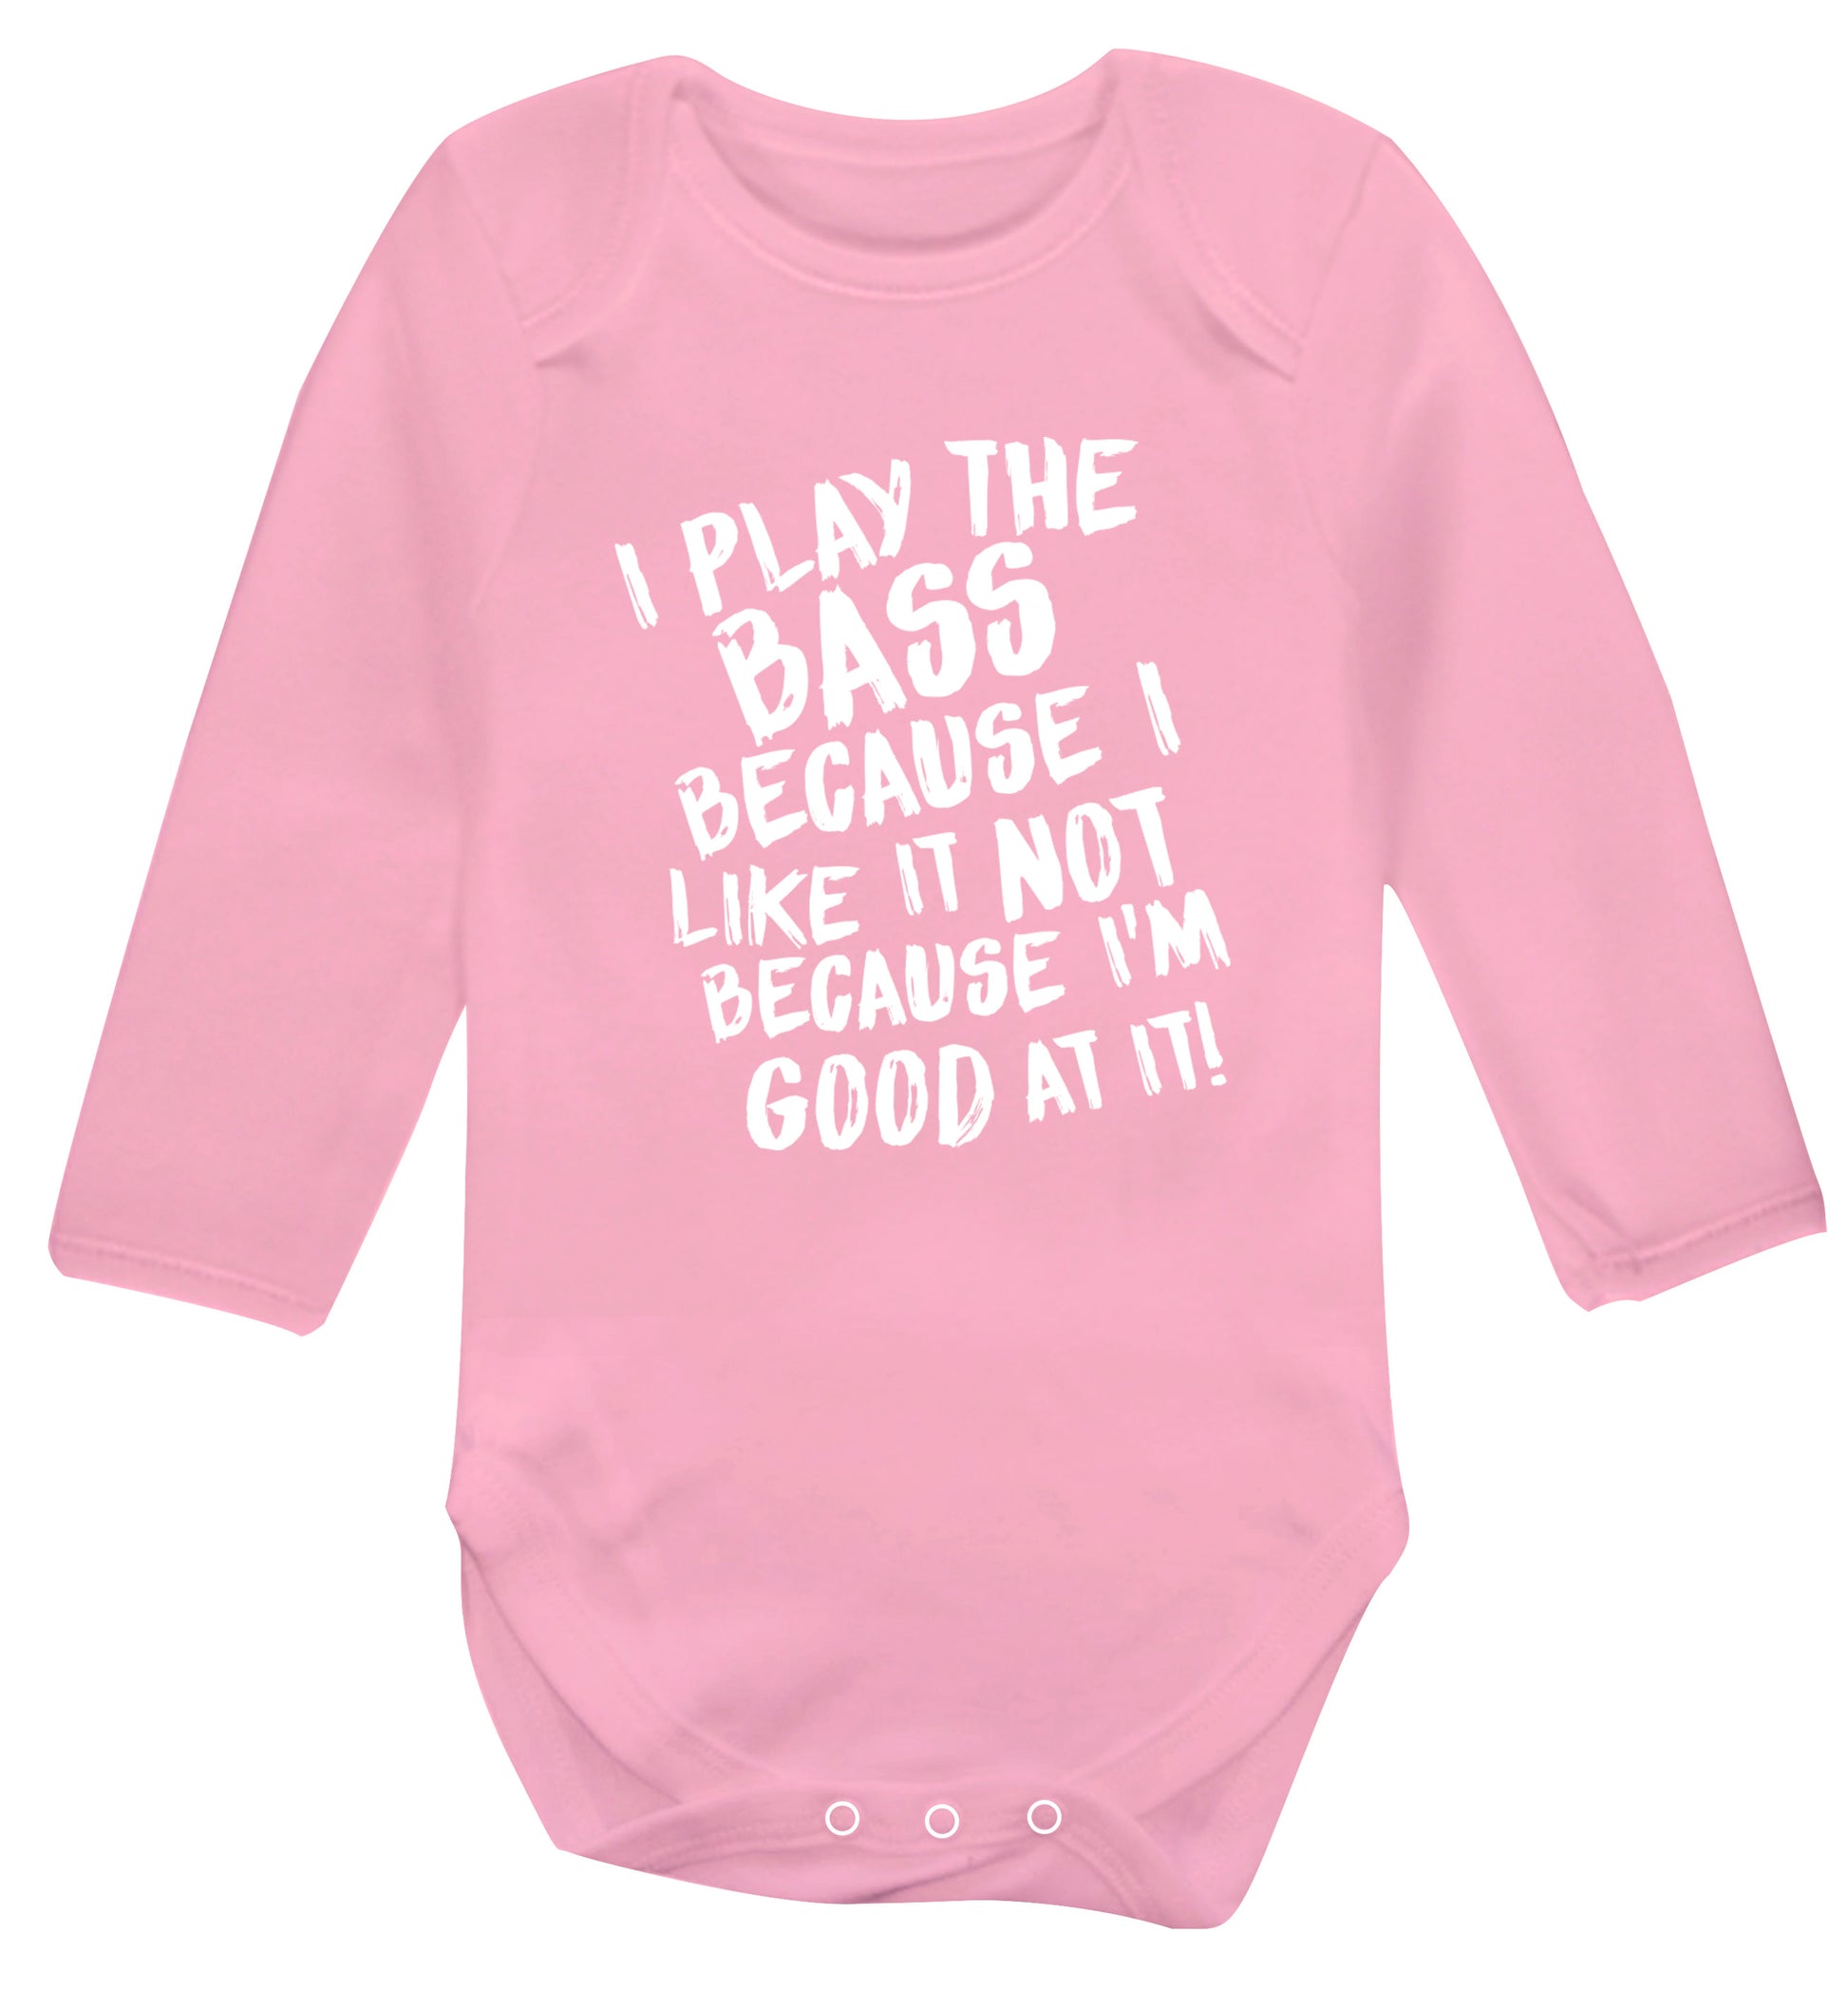 I play the bass because I like it not because I'm good at it Baby Vest long sleeved pale pink 6-12 months